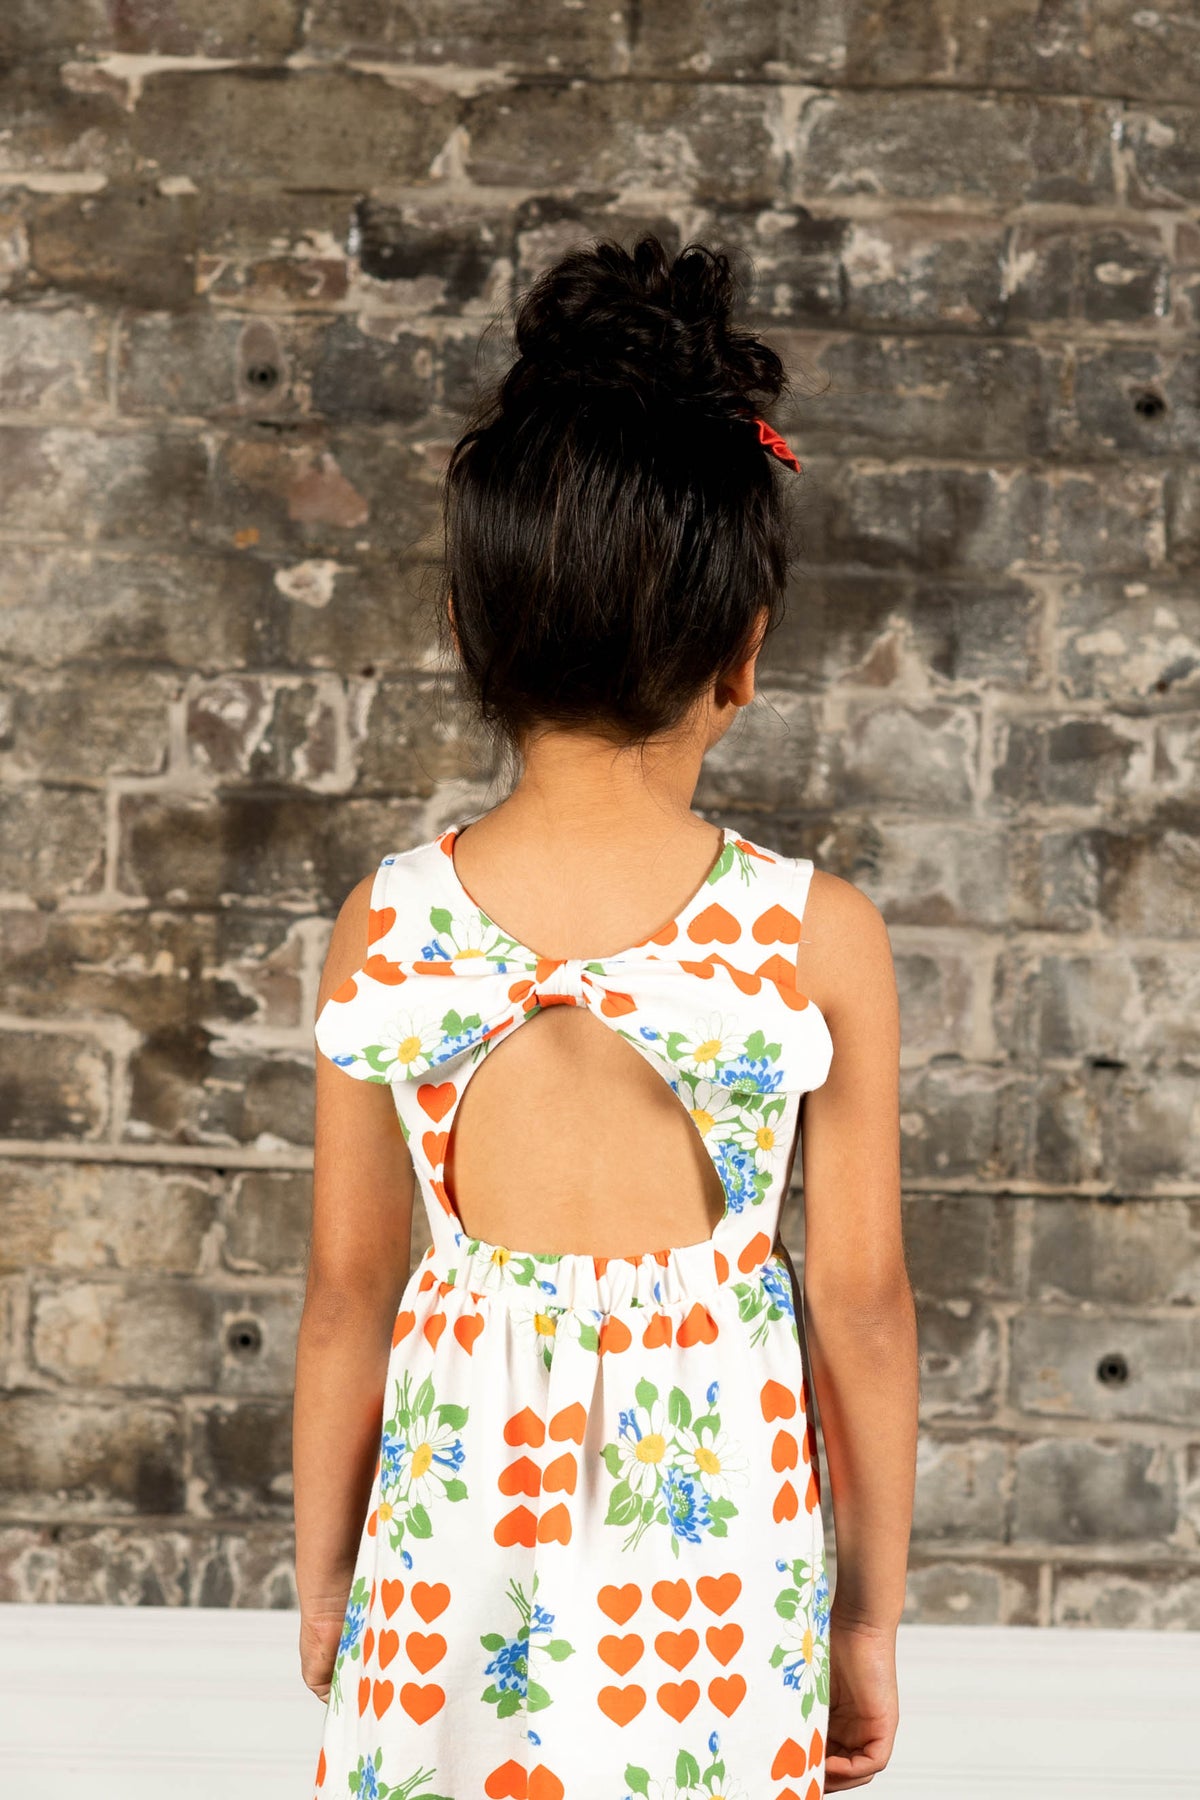 Floral Hearts Dress with Tie Back